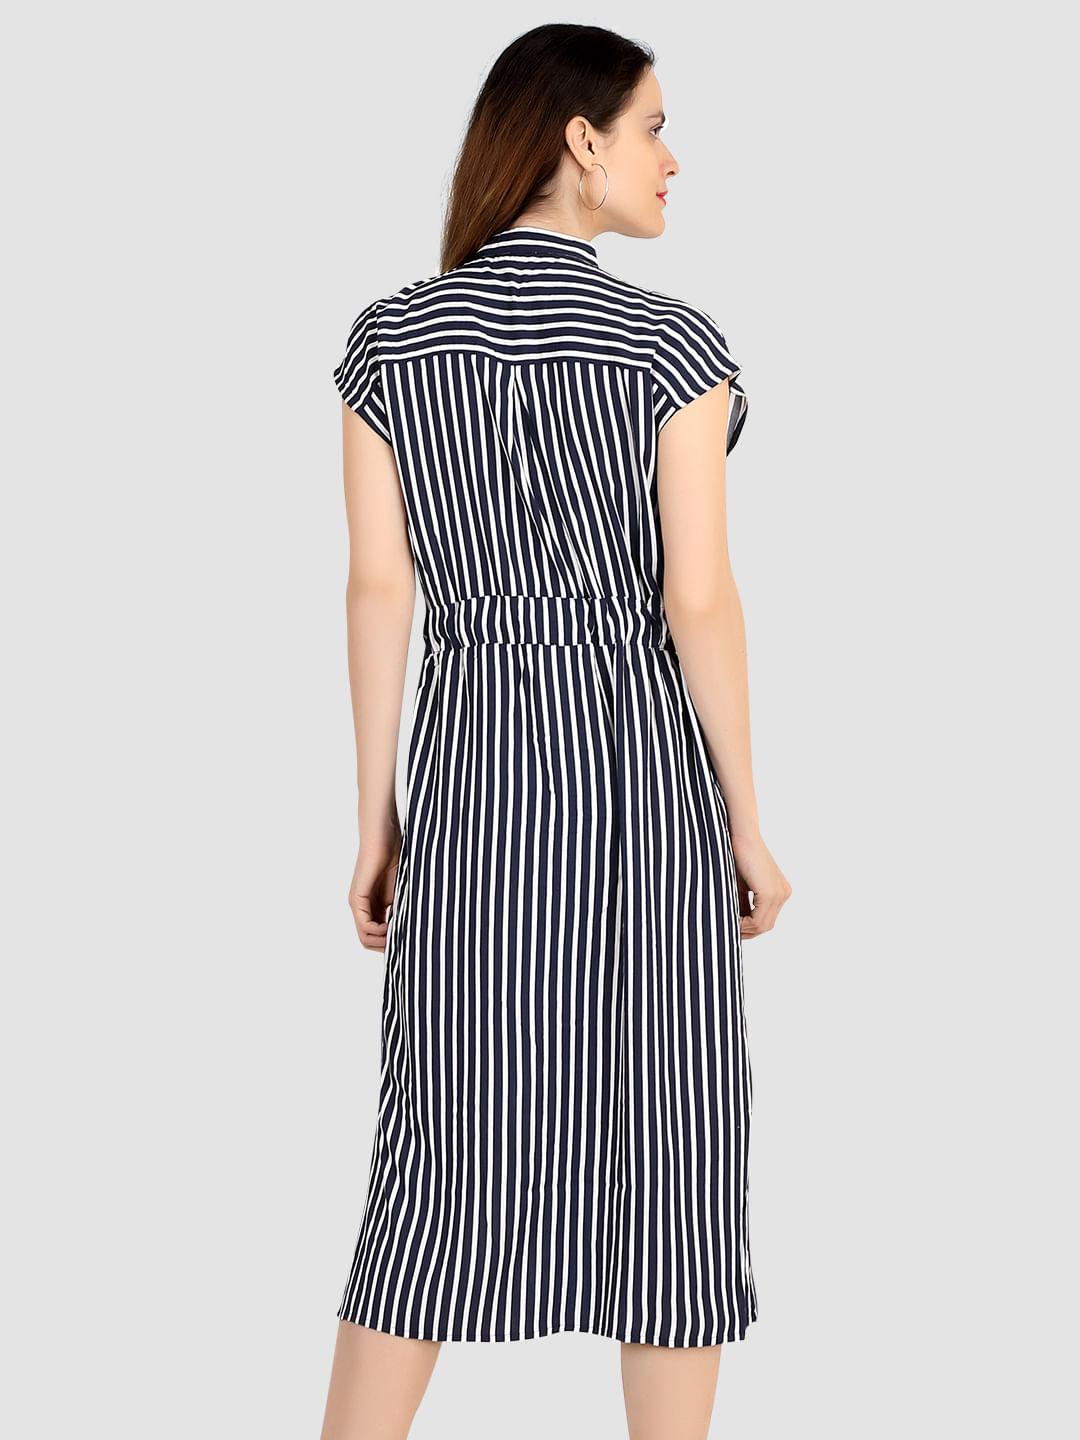 For Her Women Dress 81822-White/Black Stripes | Church suits for less